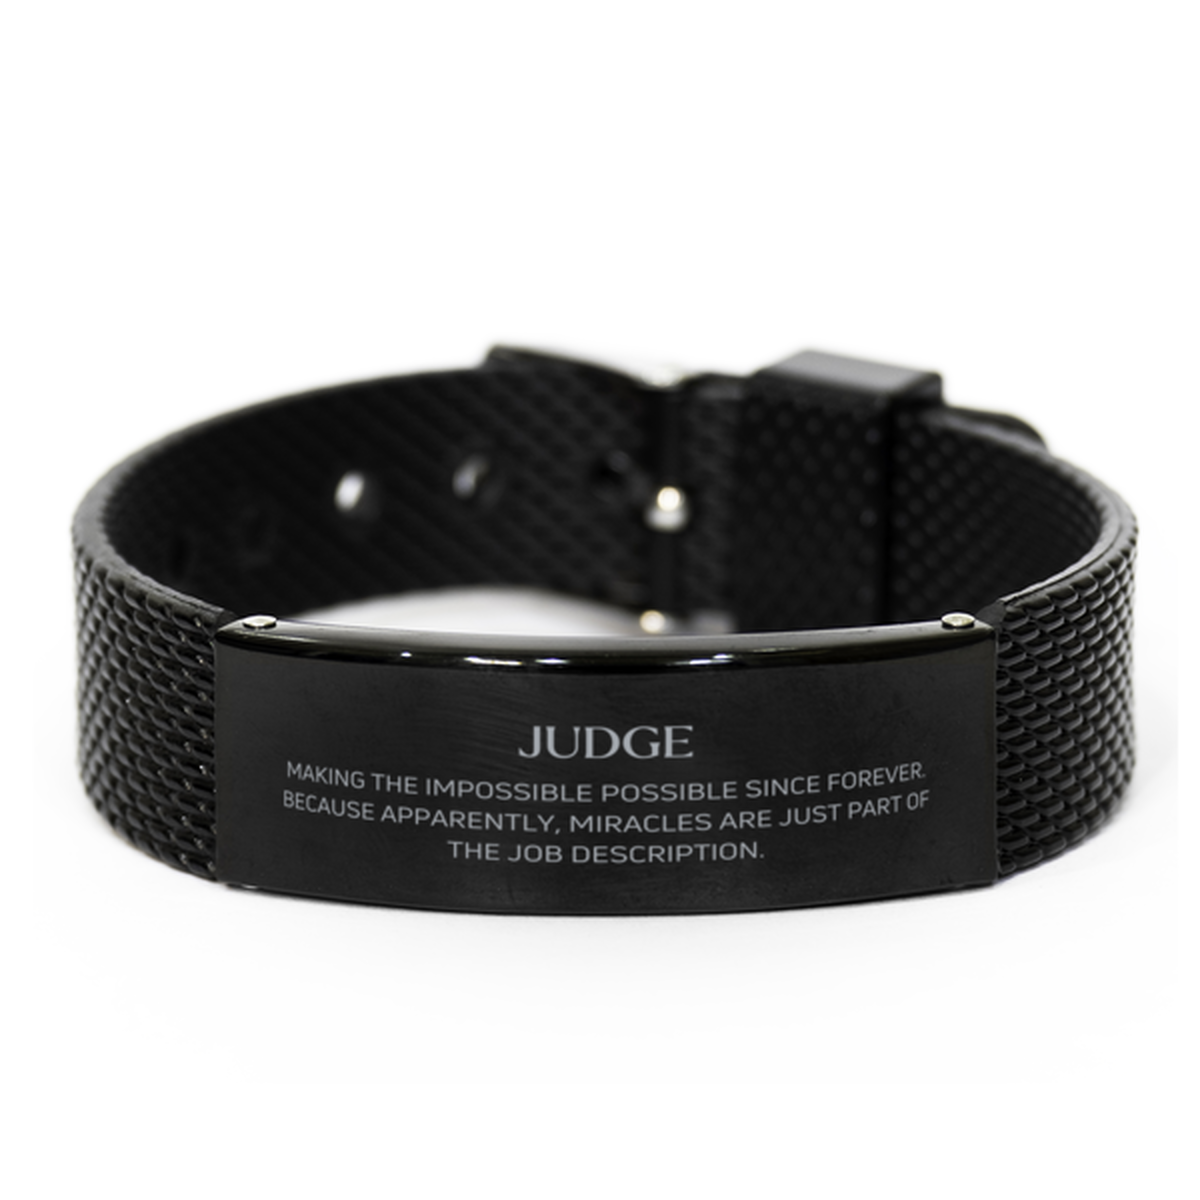 Funny Judge Gifts, Miracles are just part of the job description, Inspirational Birthday Black Shark Mesh Bracelet For Judge, Men, Women, Coworkers, Friends, Boss